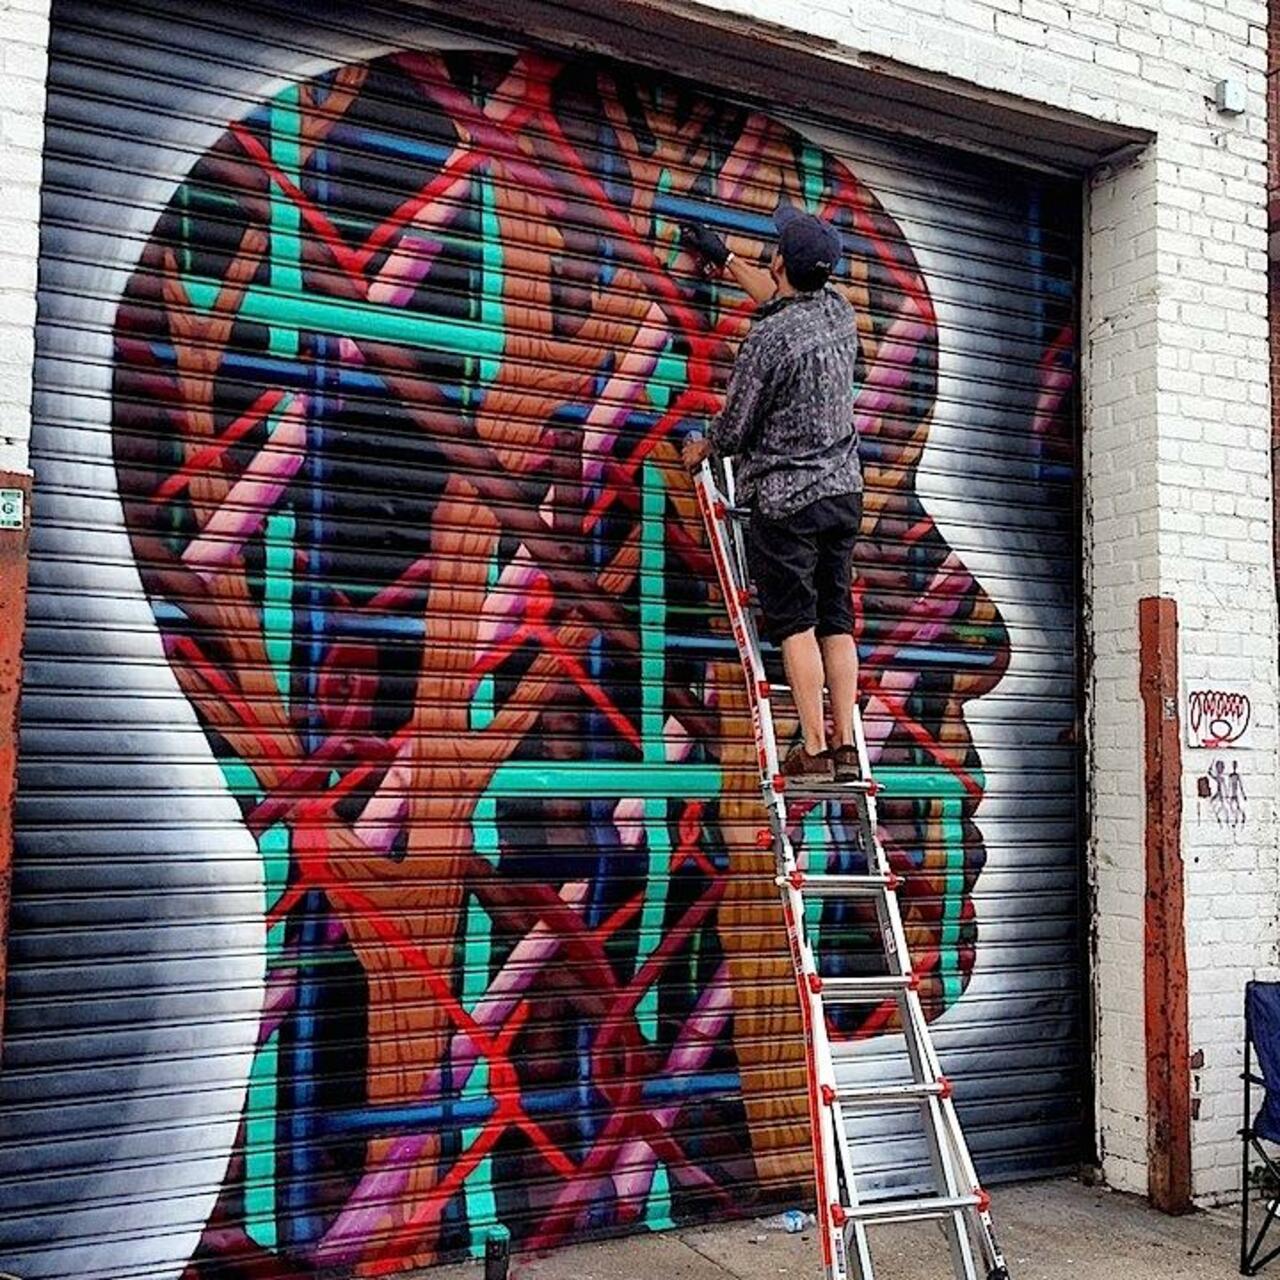 Artist: Cekis does piece for Welling-Court-NYC this year #streetart #graffiti #urban #art #mural #NYC http://t.co/mBC4qX855i